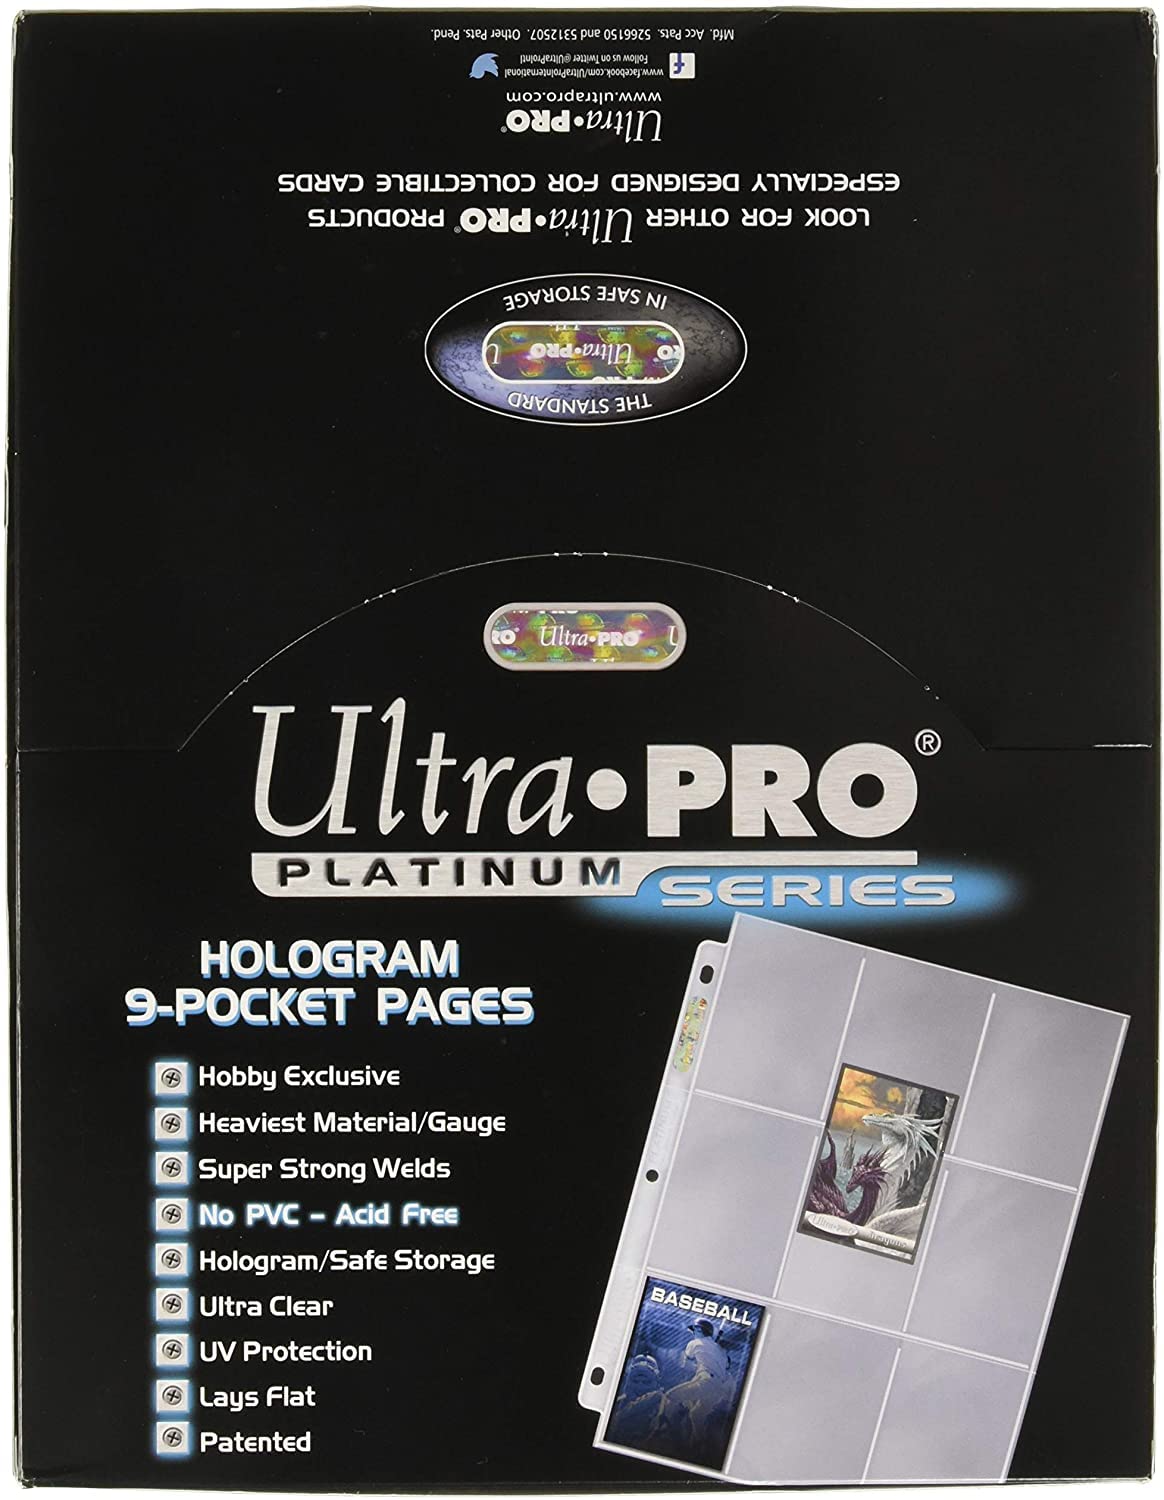 Ultra Pro 9 Pocket Pages Platinum Series 100 Pages of Card Sleeves for  Trading Card Binder, Baseball Card Binder, Pokemon Card Sleeves and  Baseball Card Sleeves Ultra Pro Pocket Pages